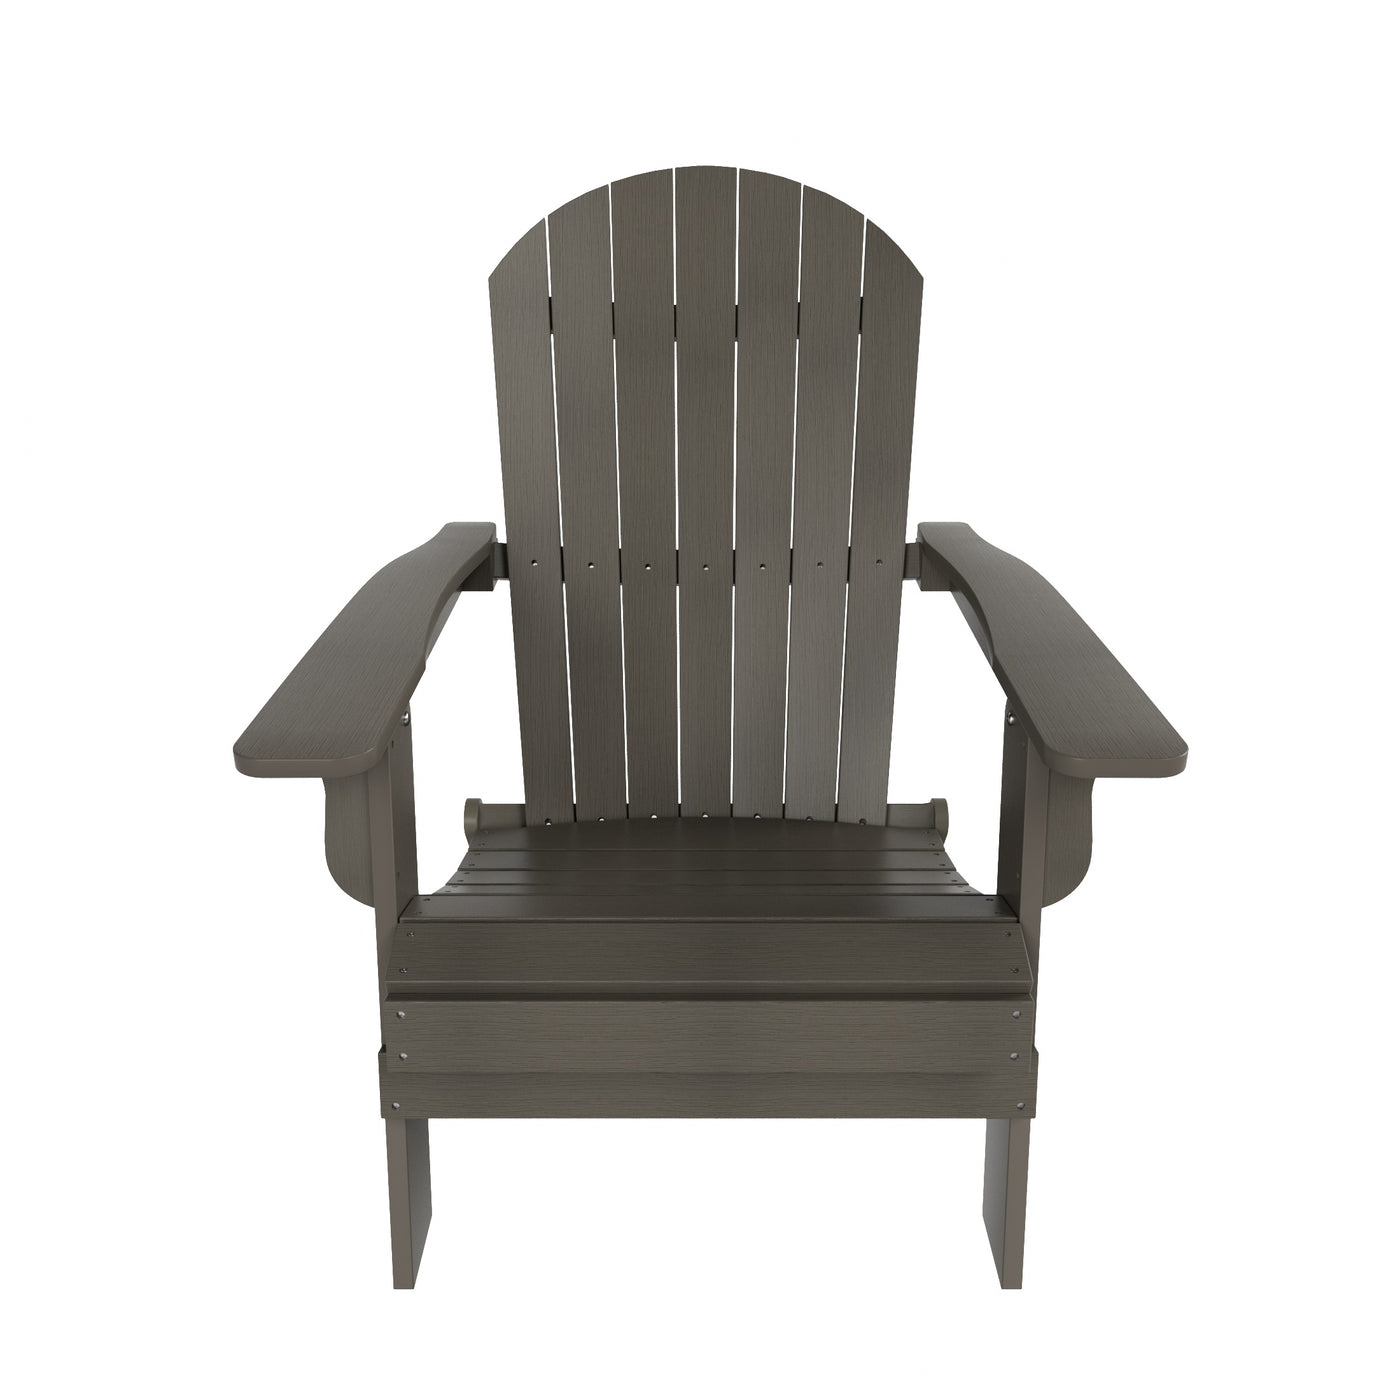 Tuscany HIPS 3-Piece Outdoor Folding Adirondack Chair With Side Table and Folding Ottoman Set